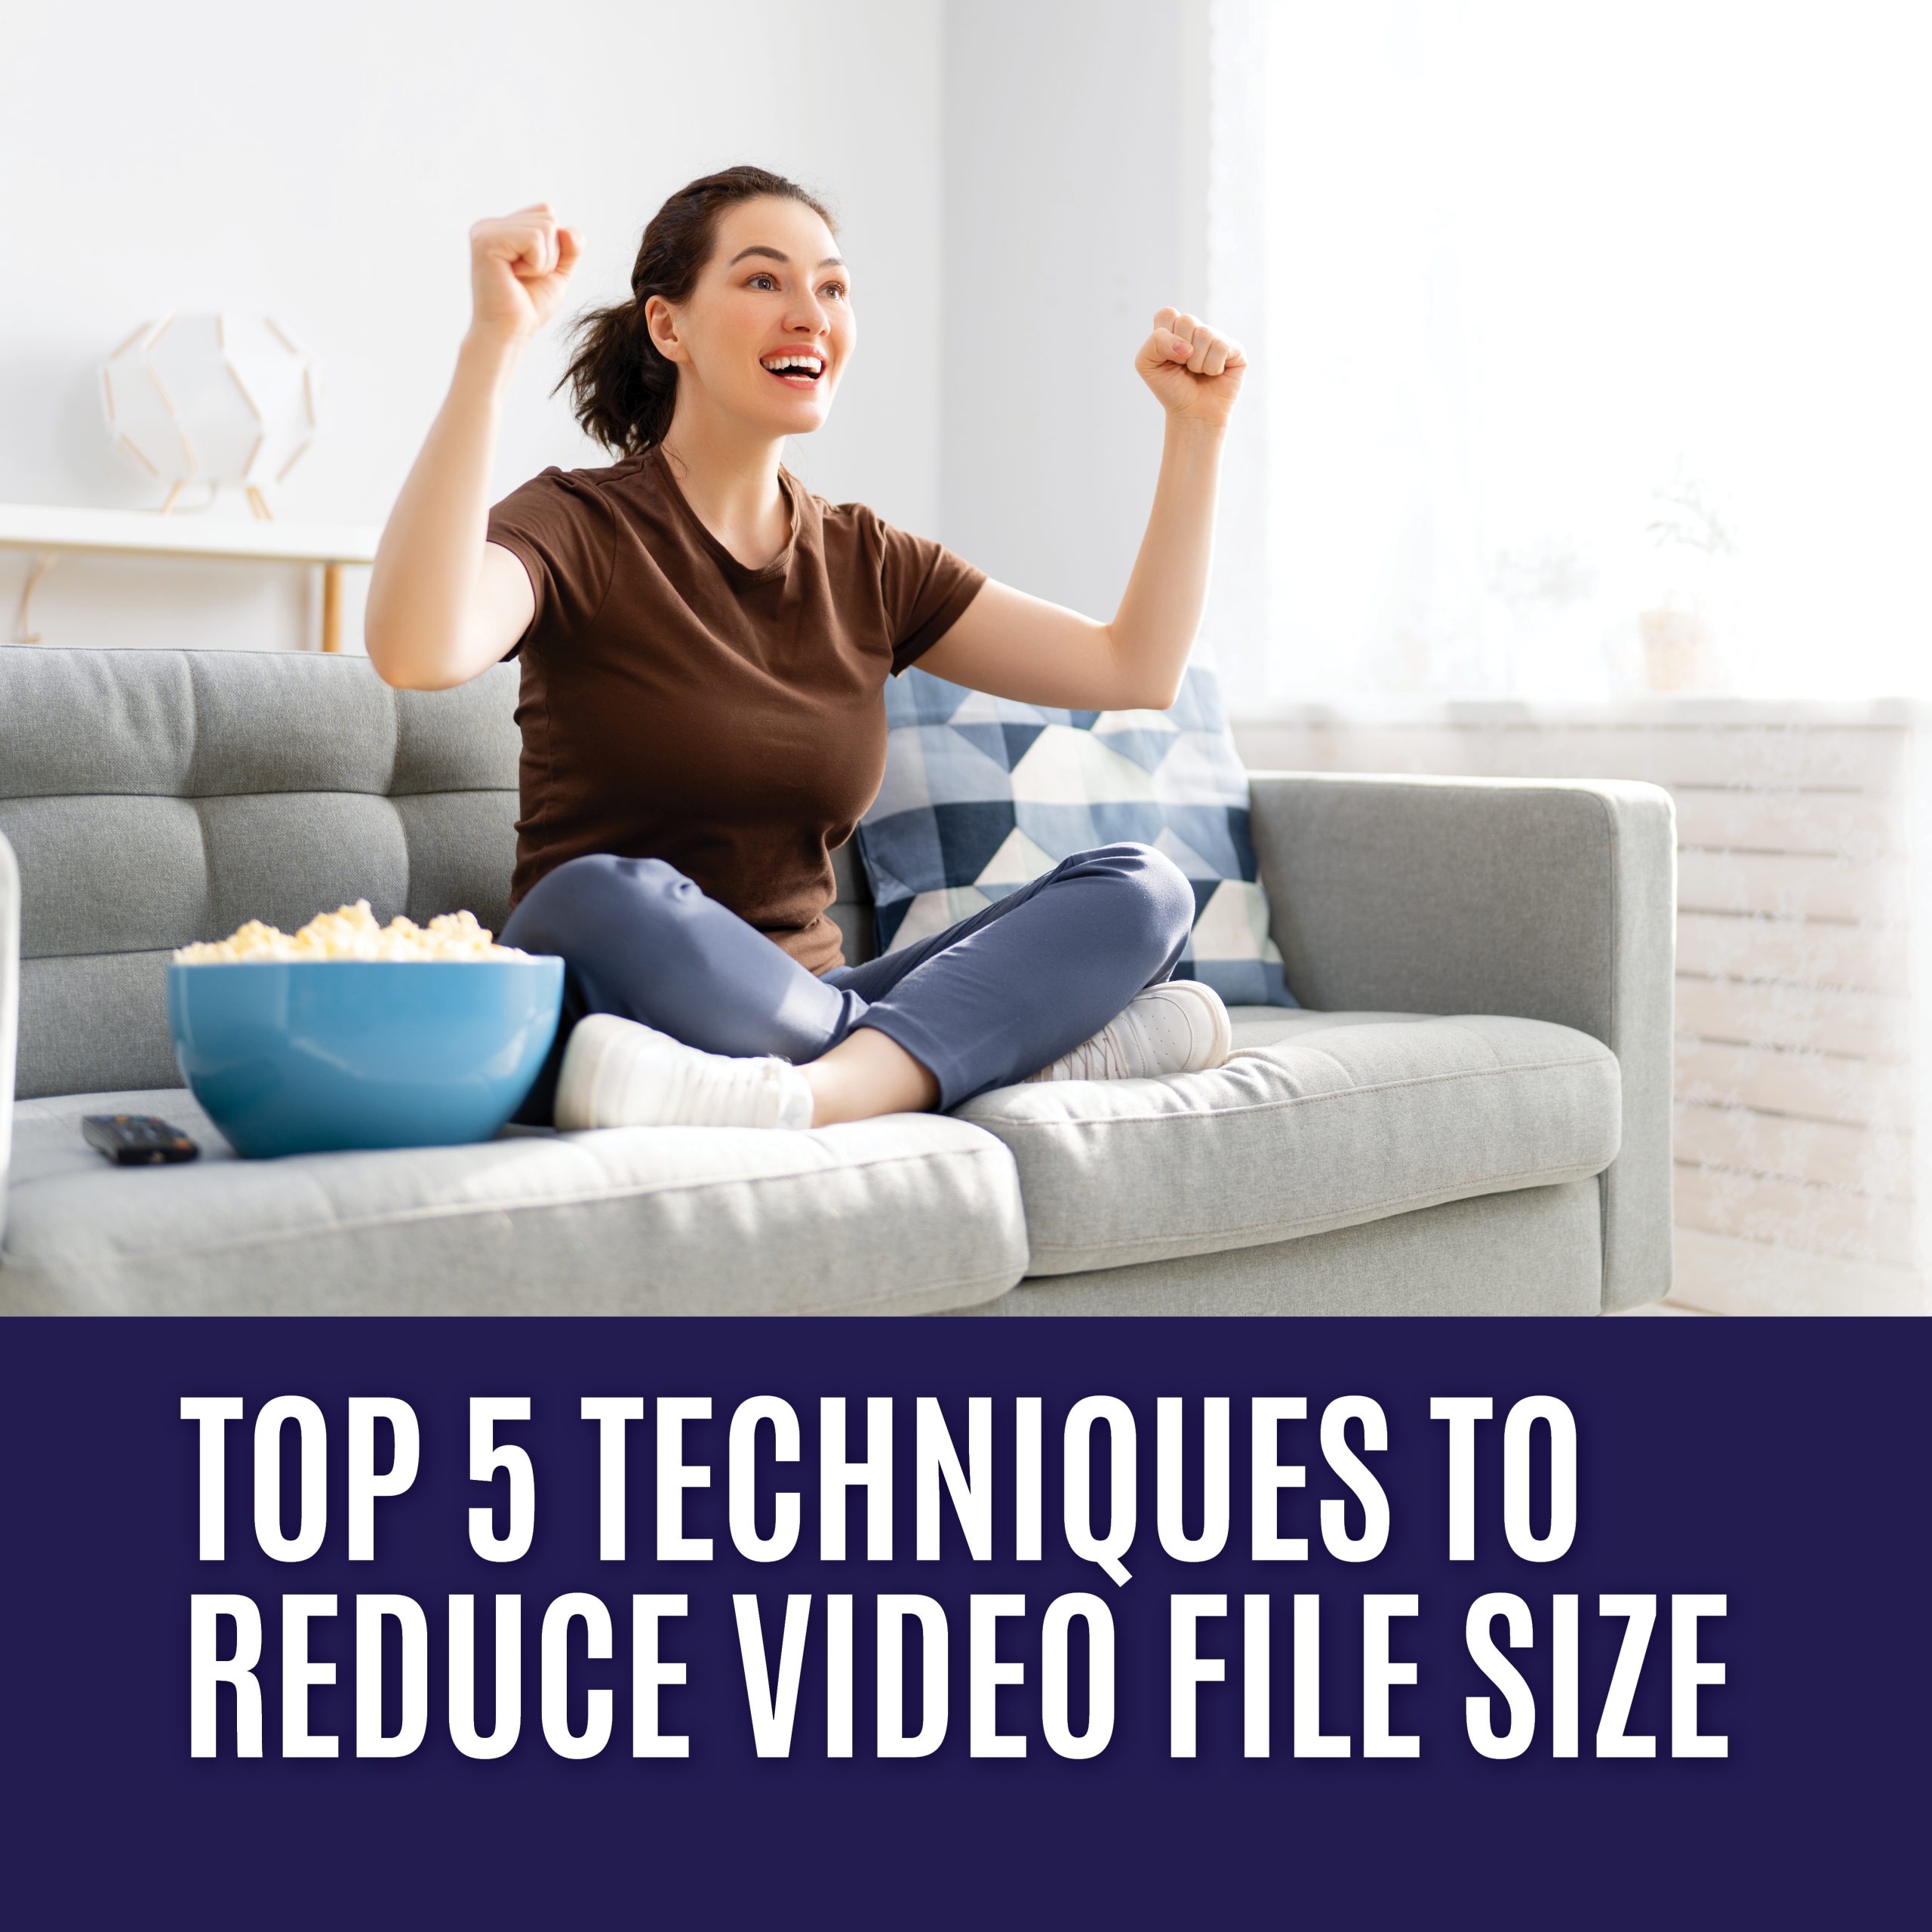 Top 5 Techniques To Reduce Video File Size